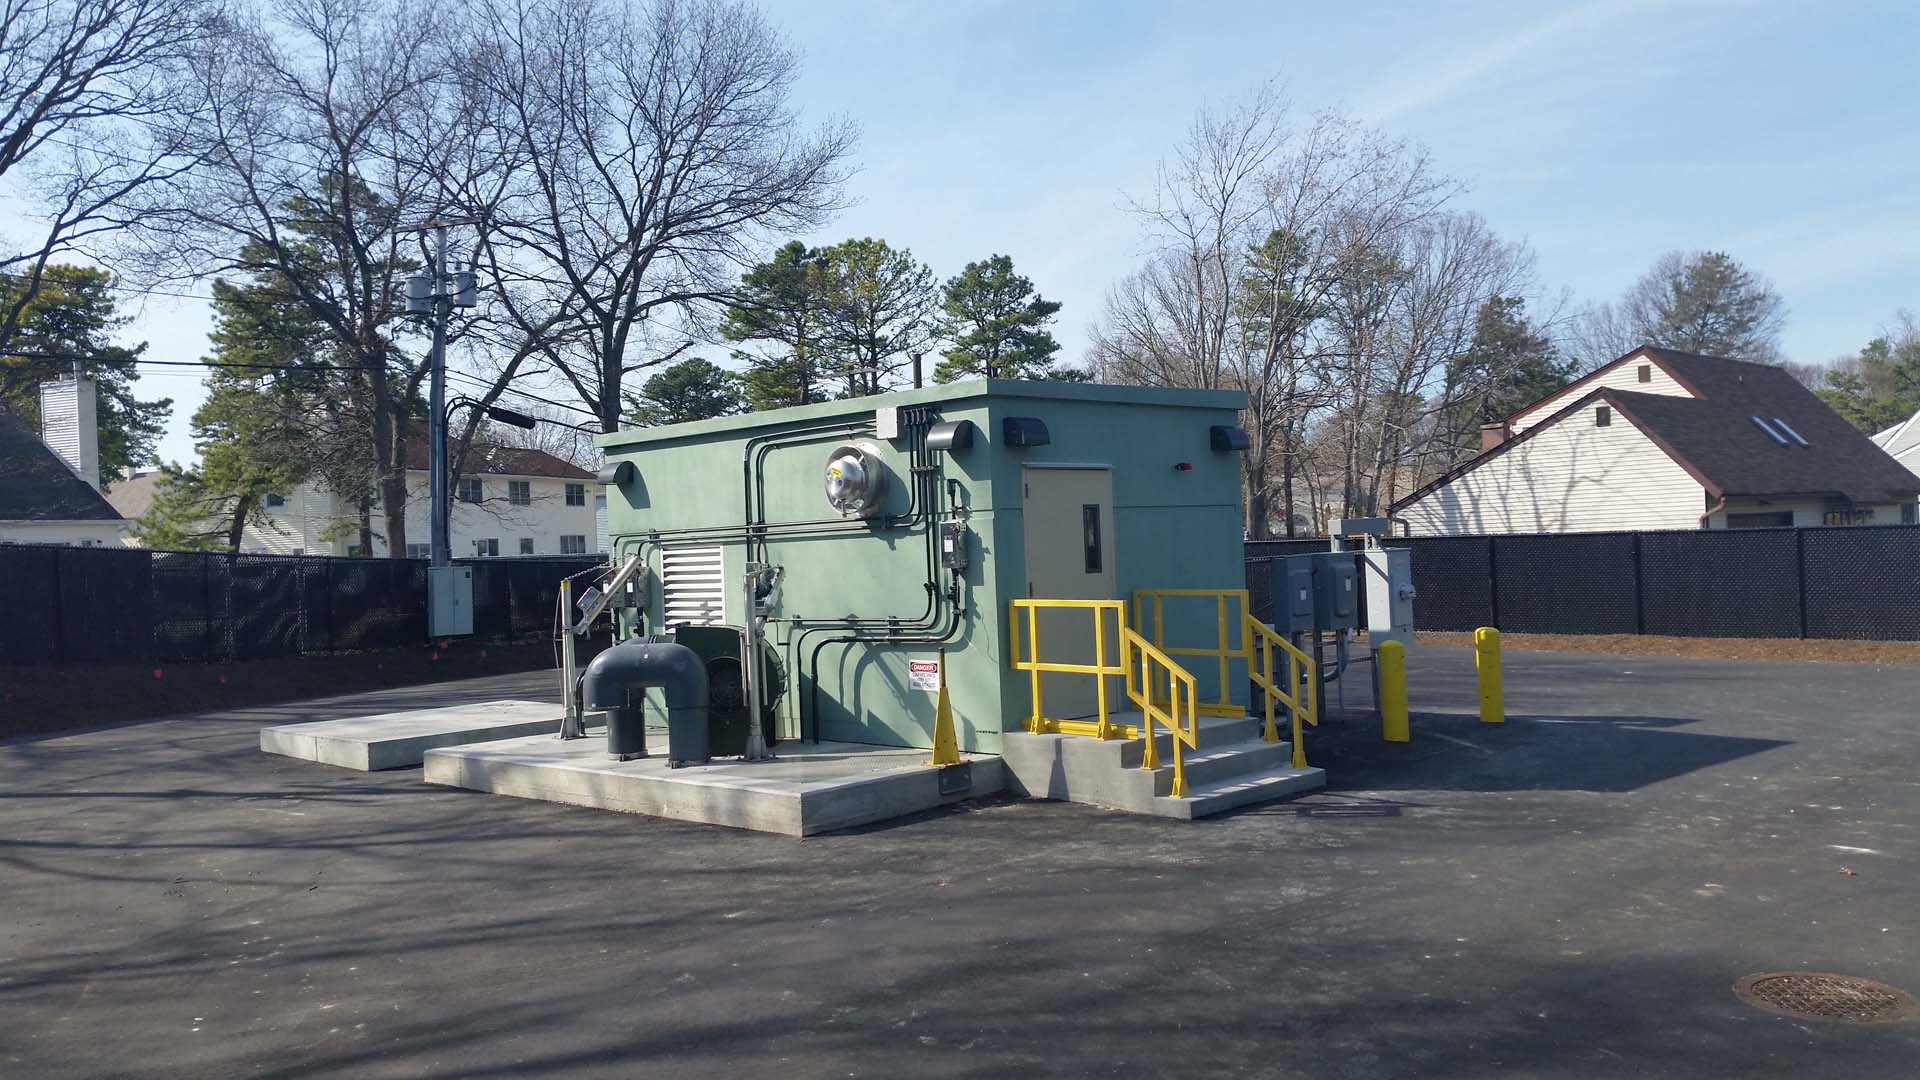 Suffolk County Department of Public Works, SCSD #11 Pumping Station #3 Replacement, Selden, NY